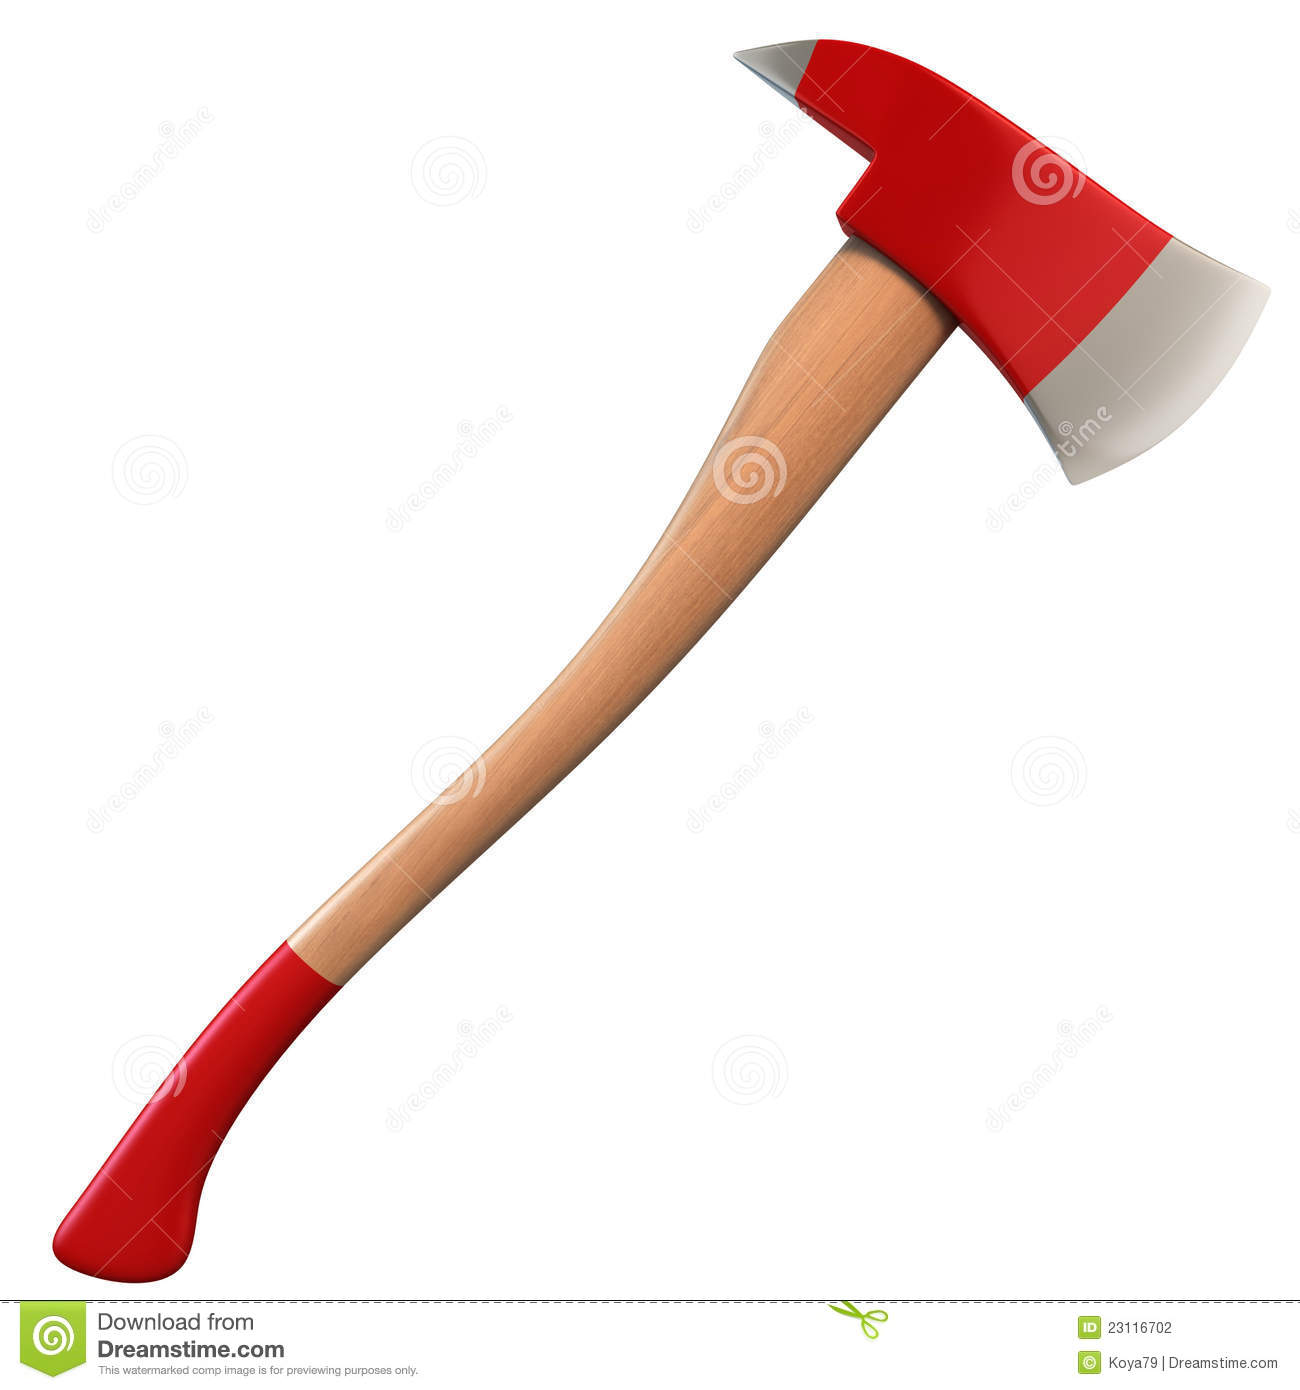 Firefighter Axe Stock Photography   Image  23116702